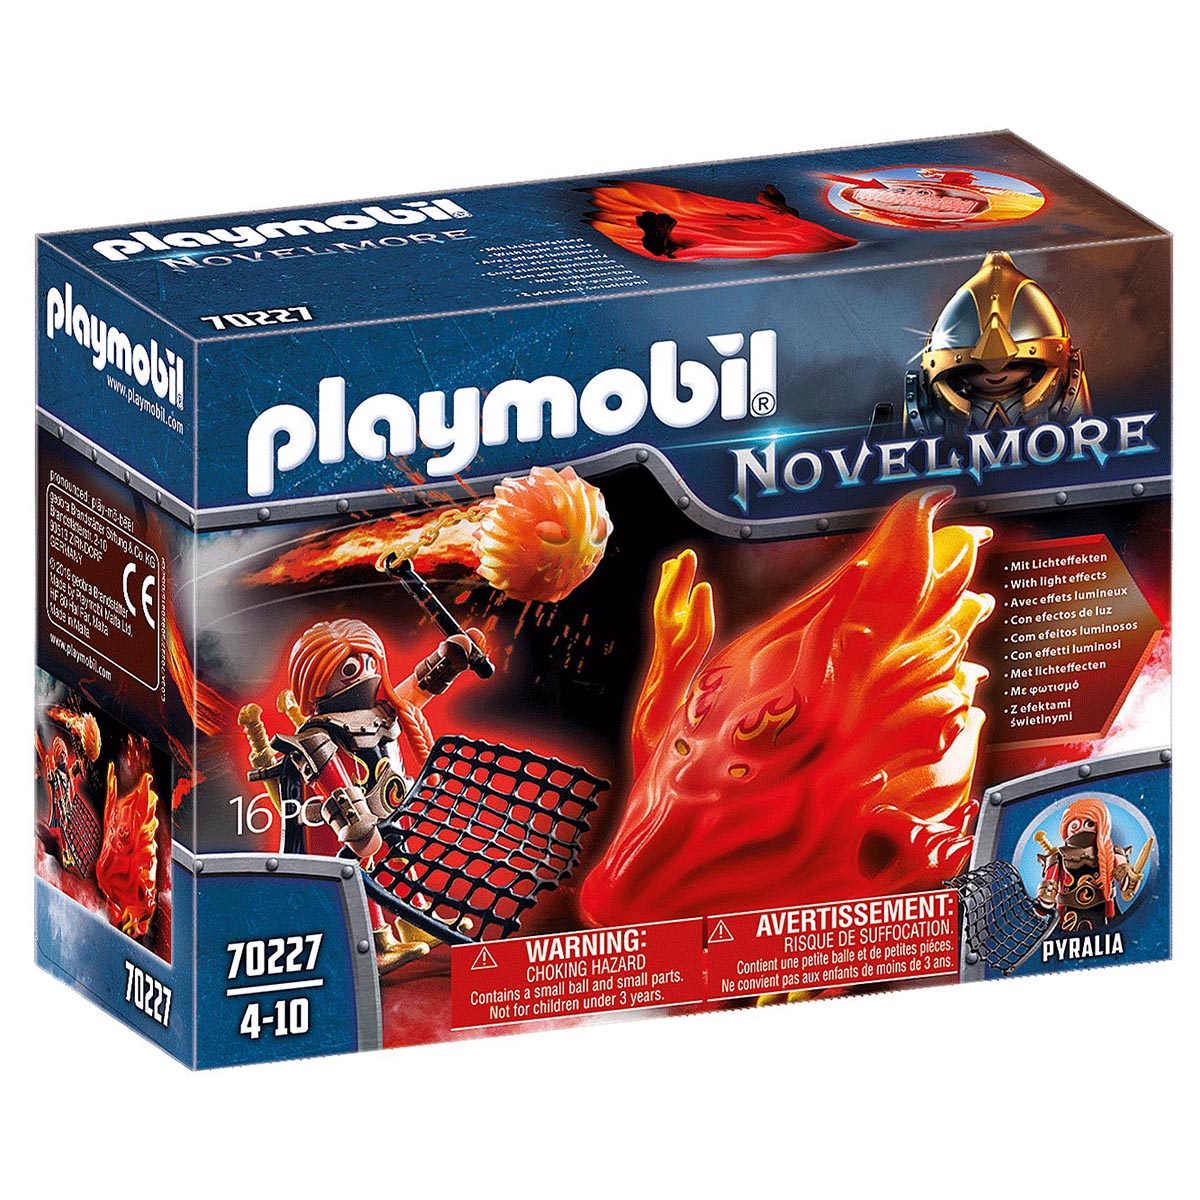 Playmobil Novelmore Fortress with Knights Playset